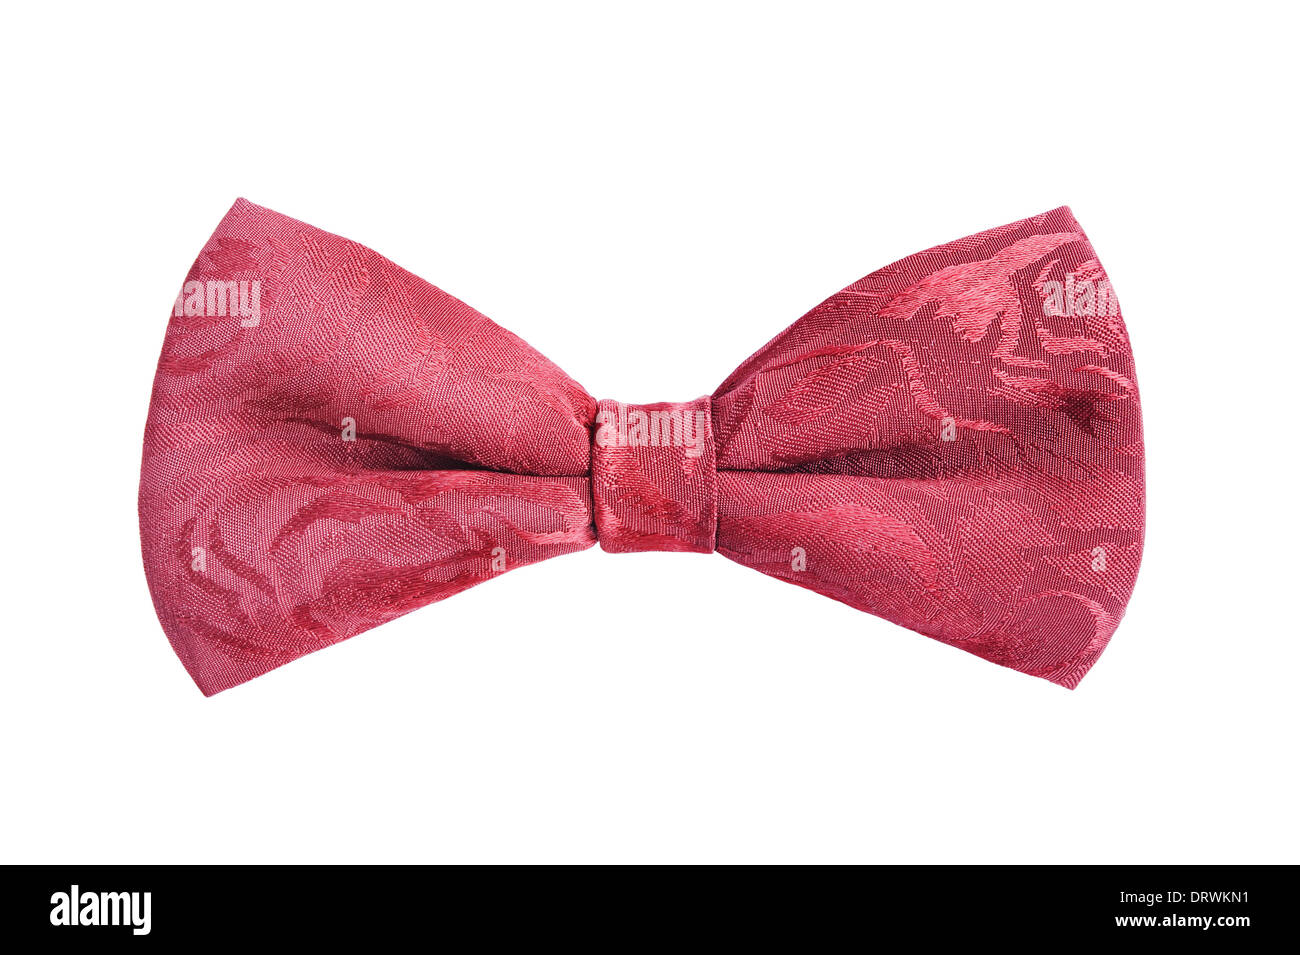 Retro red bow tie isolated on white background Stock Photo